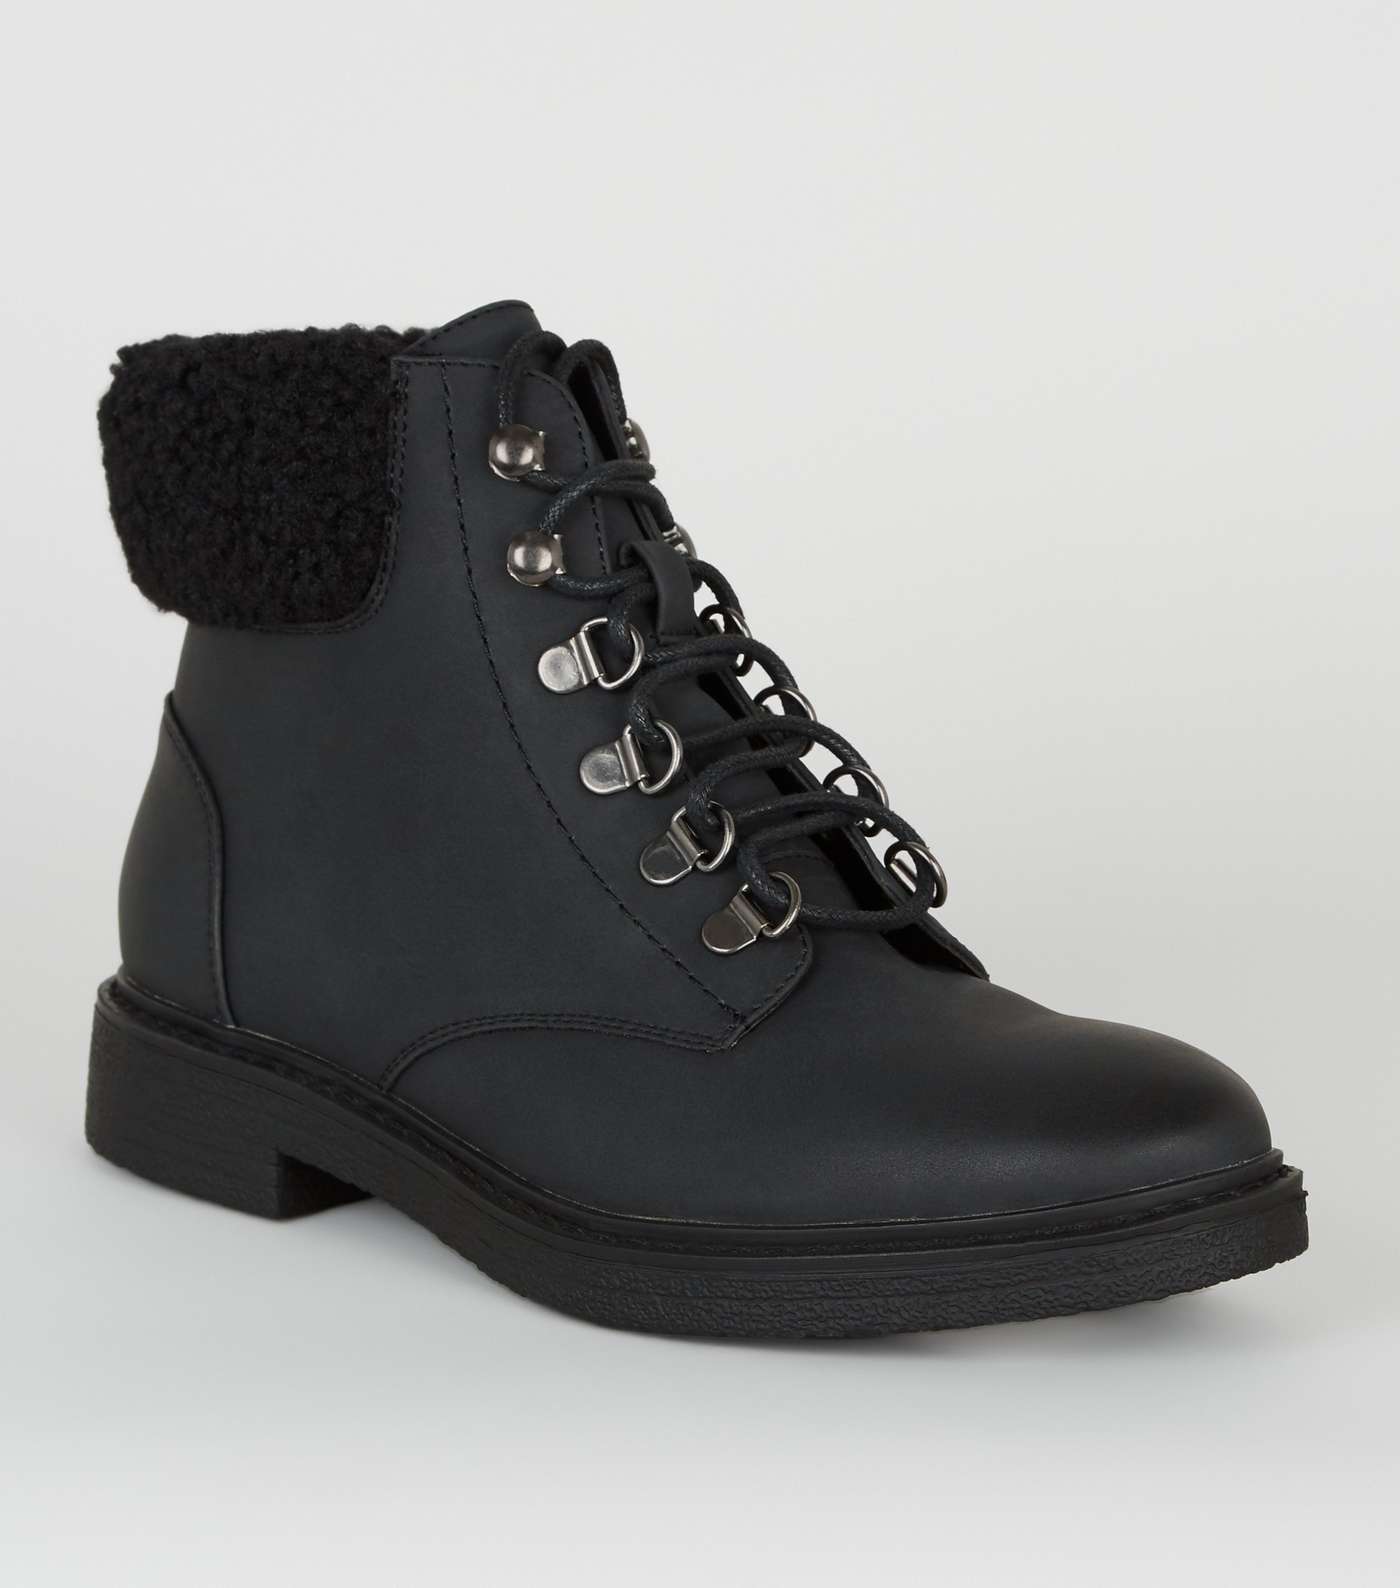 Girls Black Teddy Trim Lace Up Boots